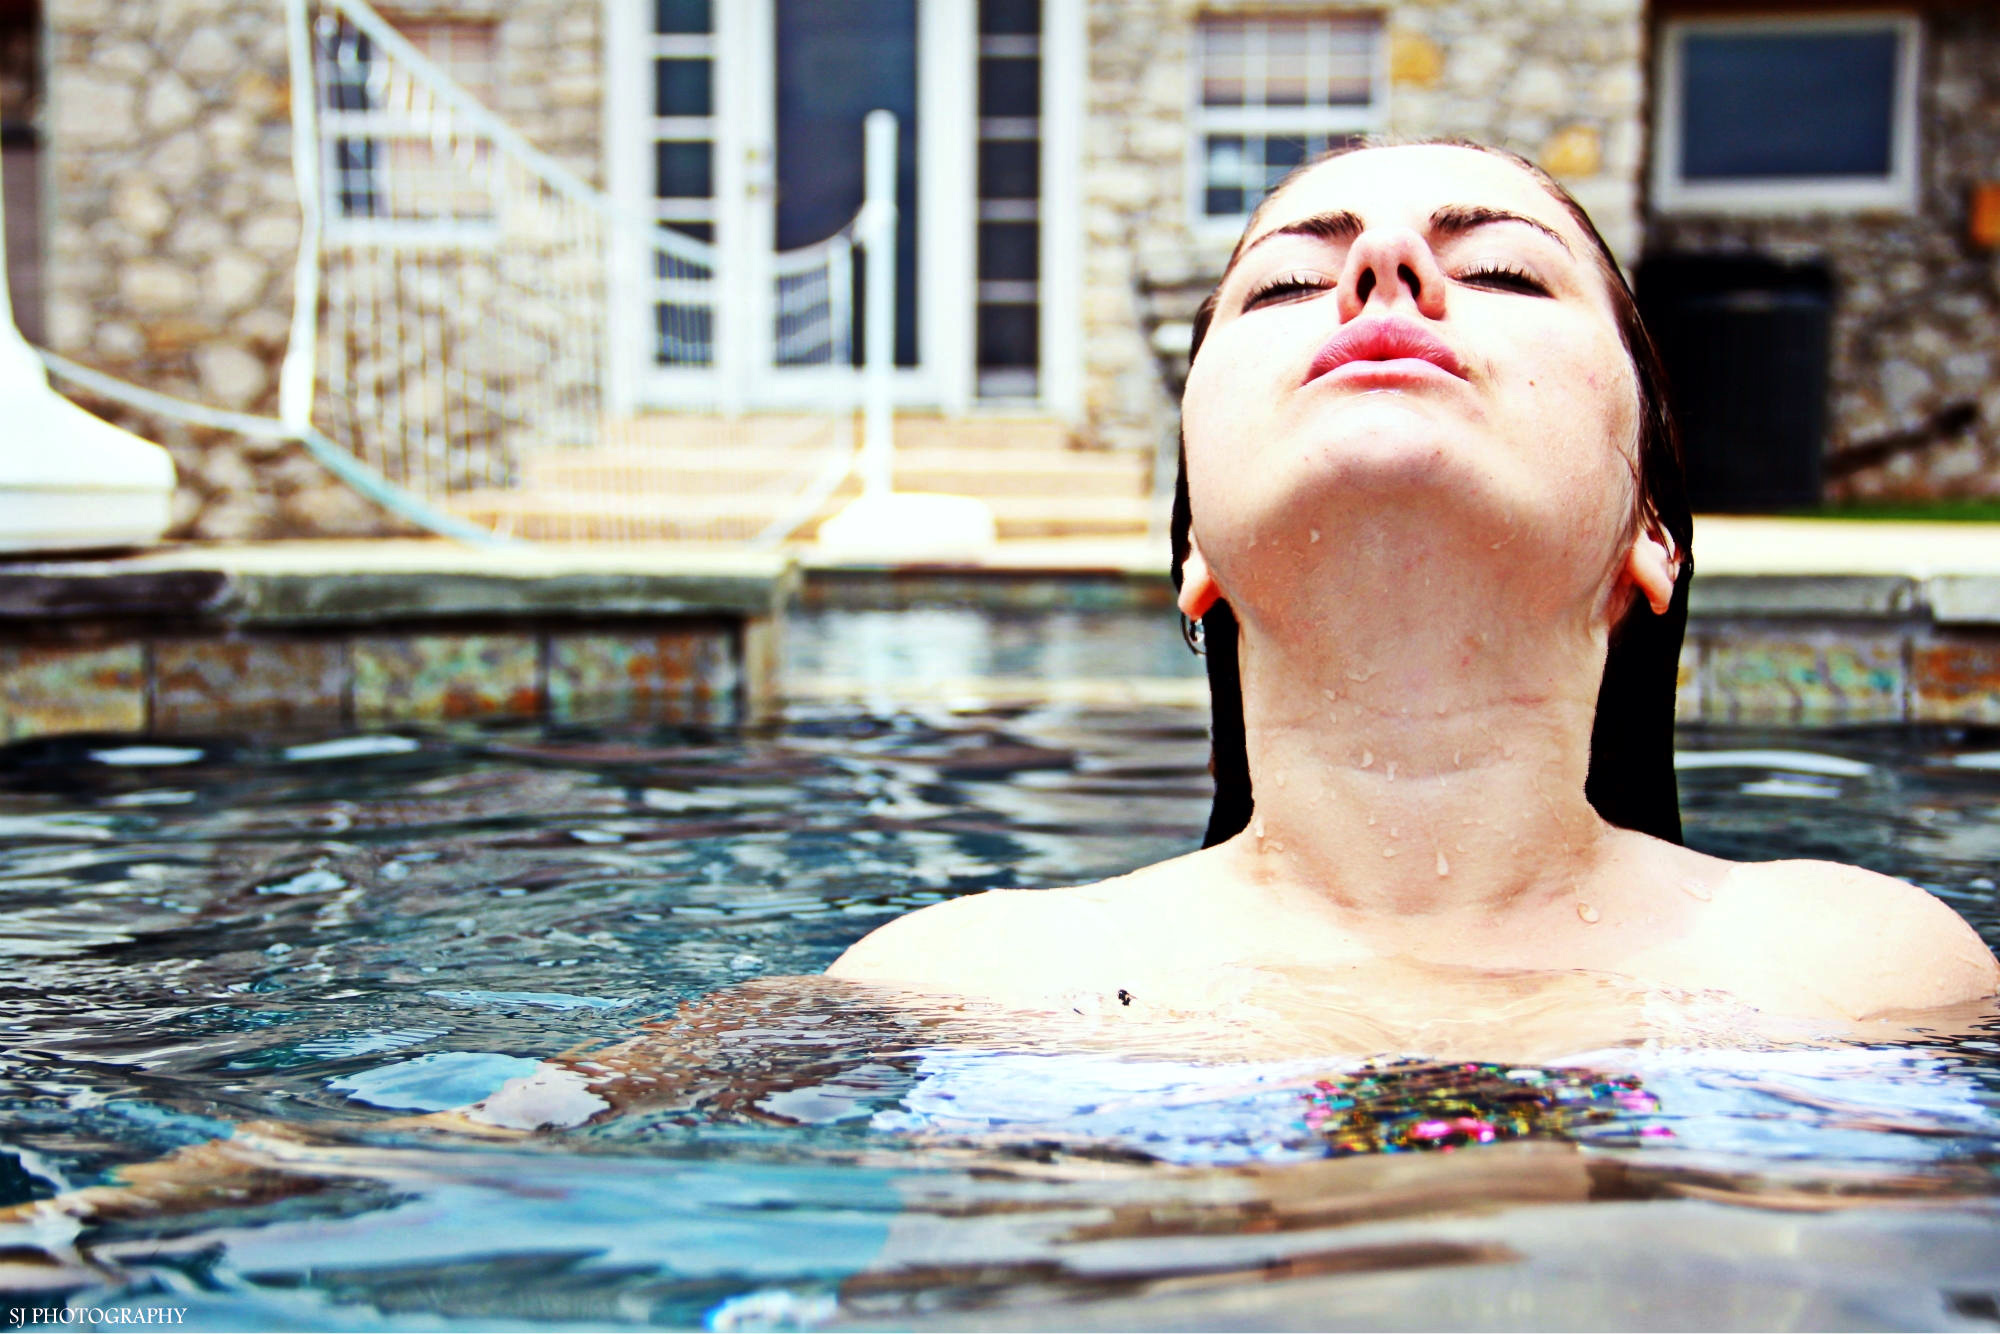 Can You Swim While Wearing Eyelash Extensions?